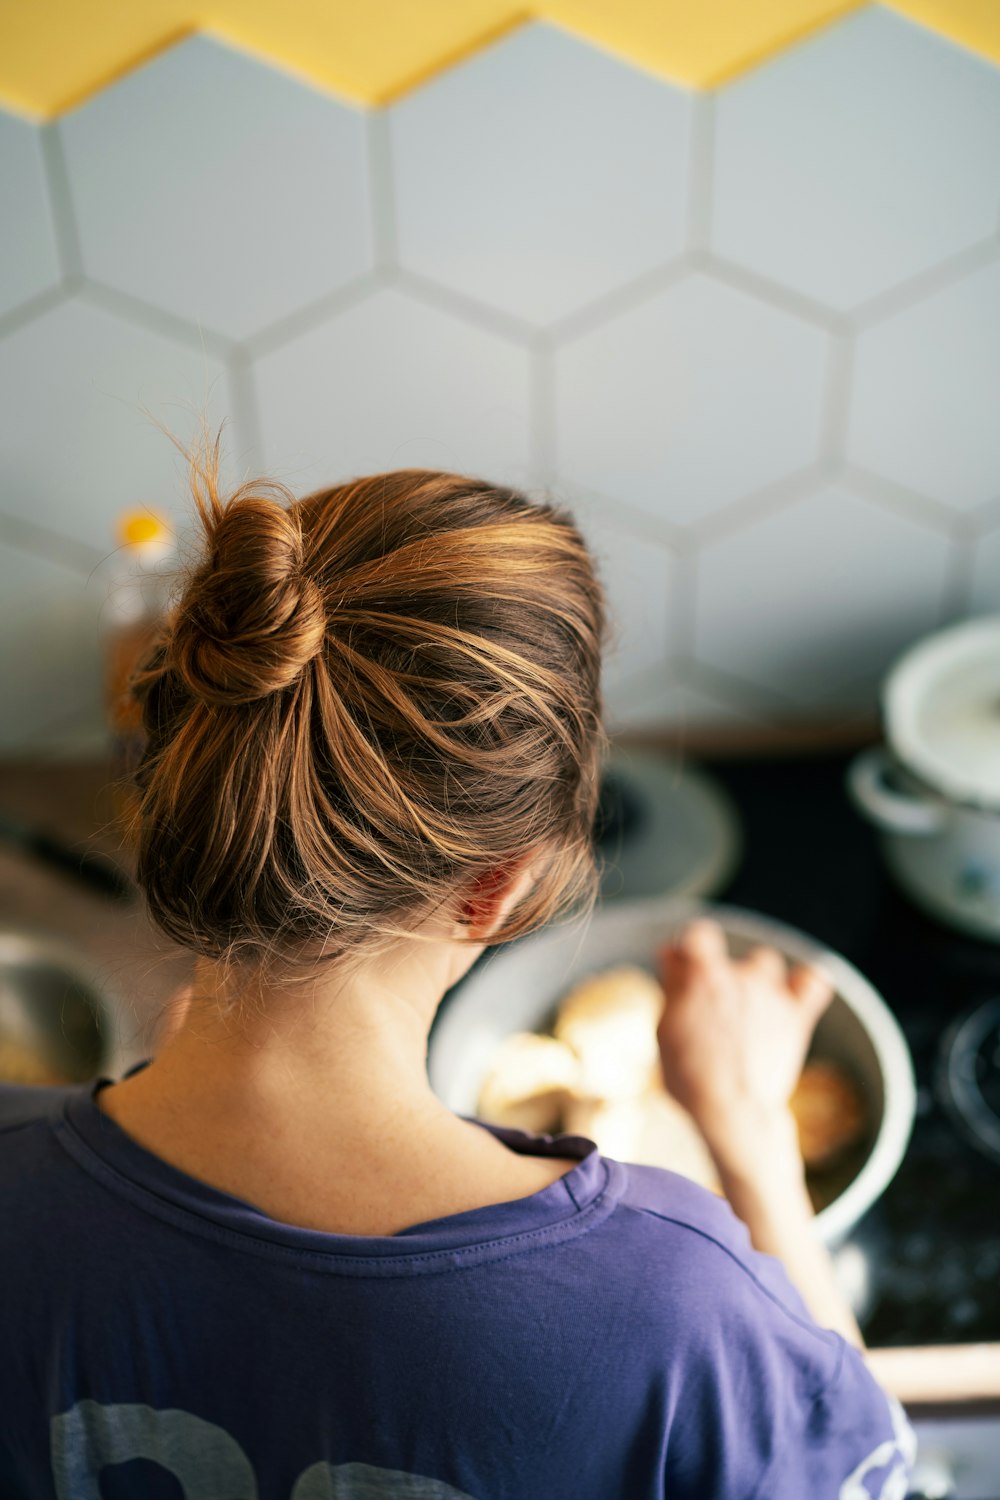 a woman standing in a kitchen preparing food